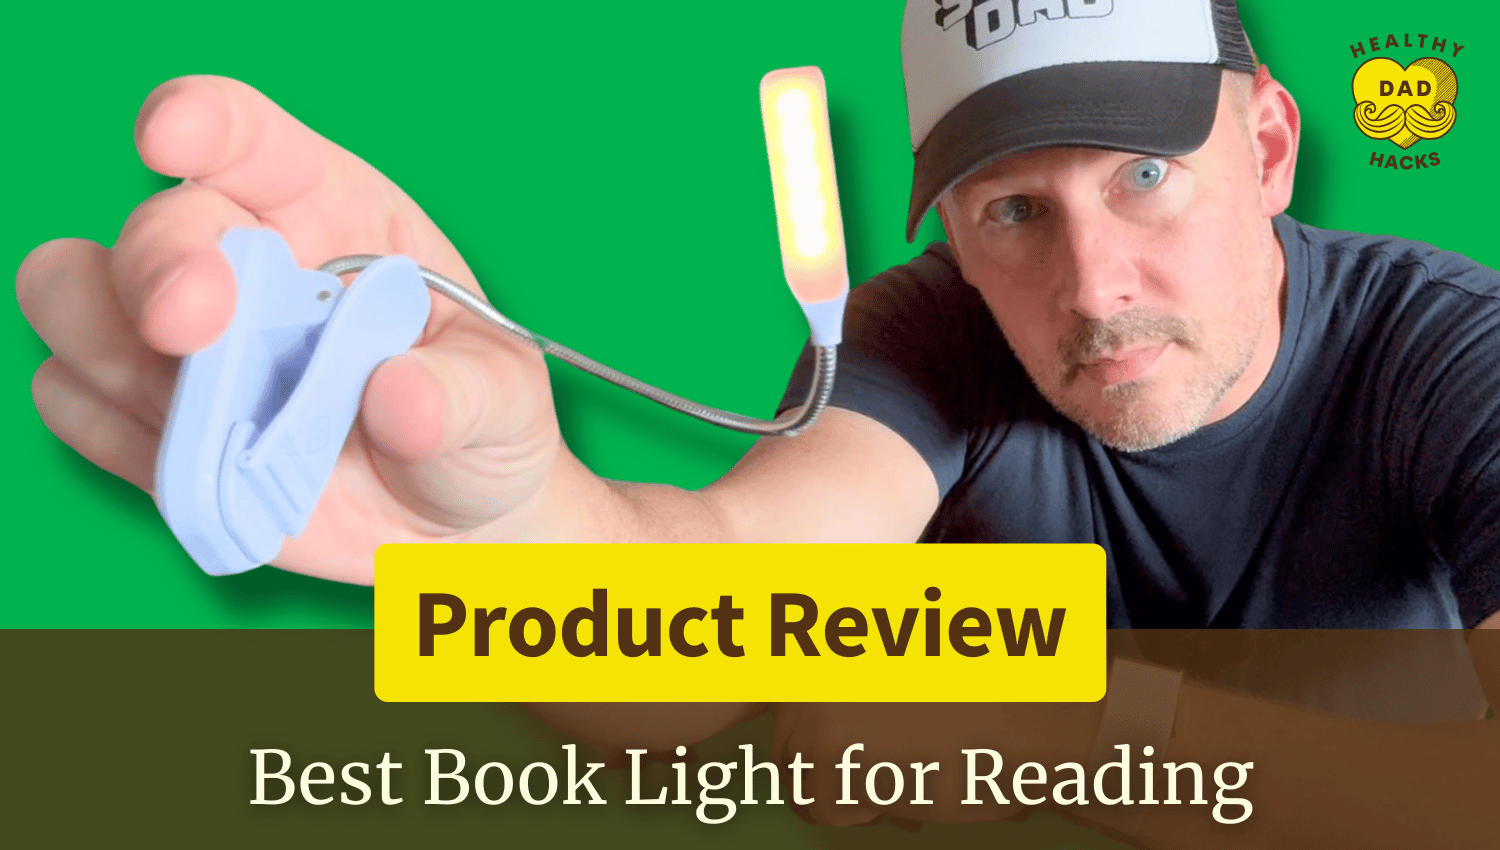 Best Book Light for Reading Amazon Review